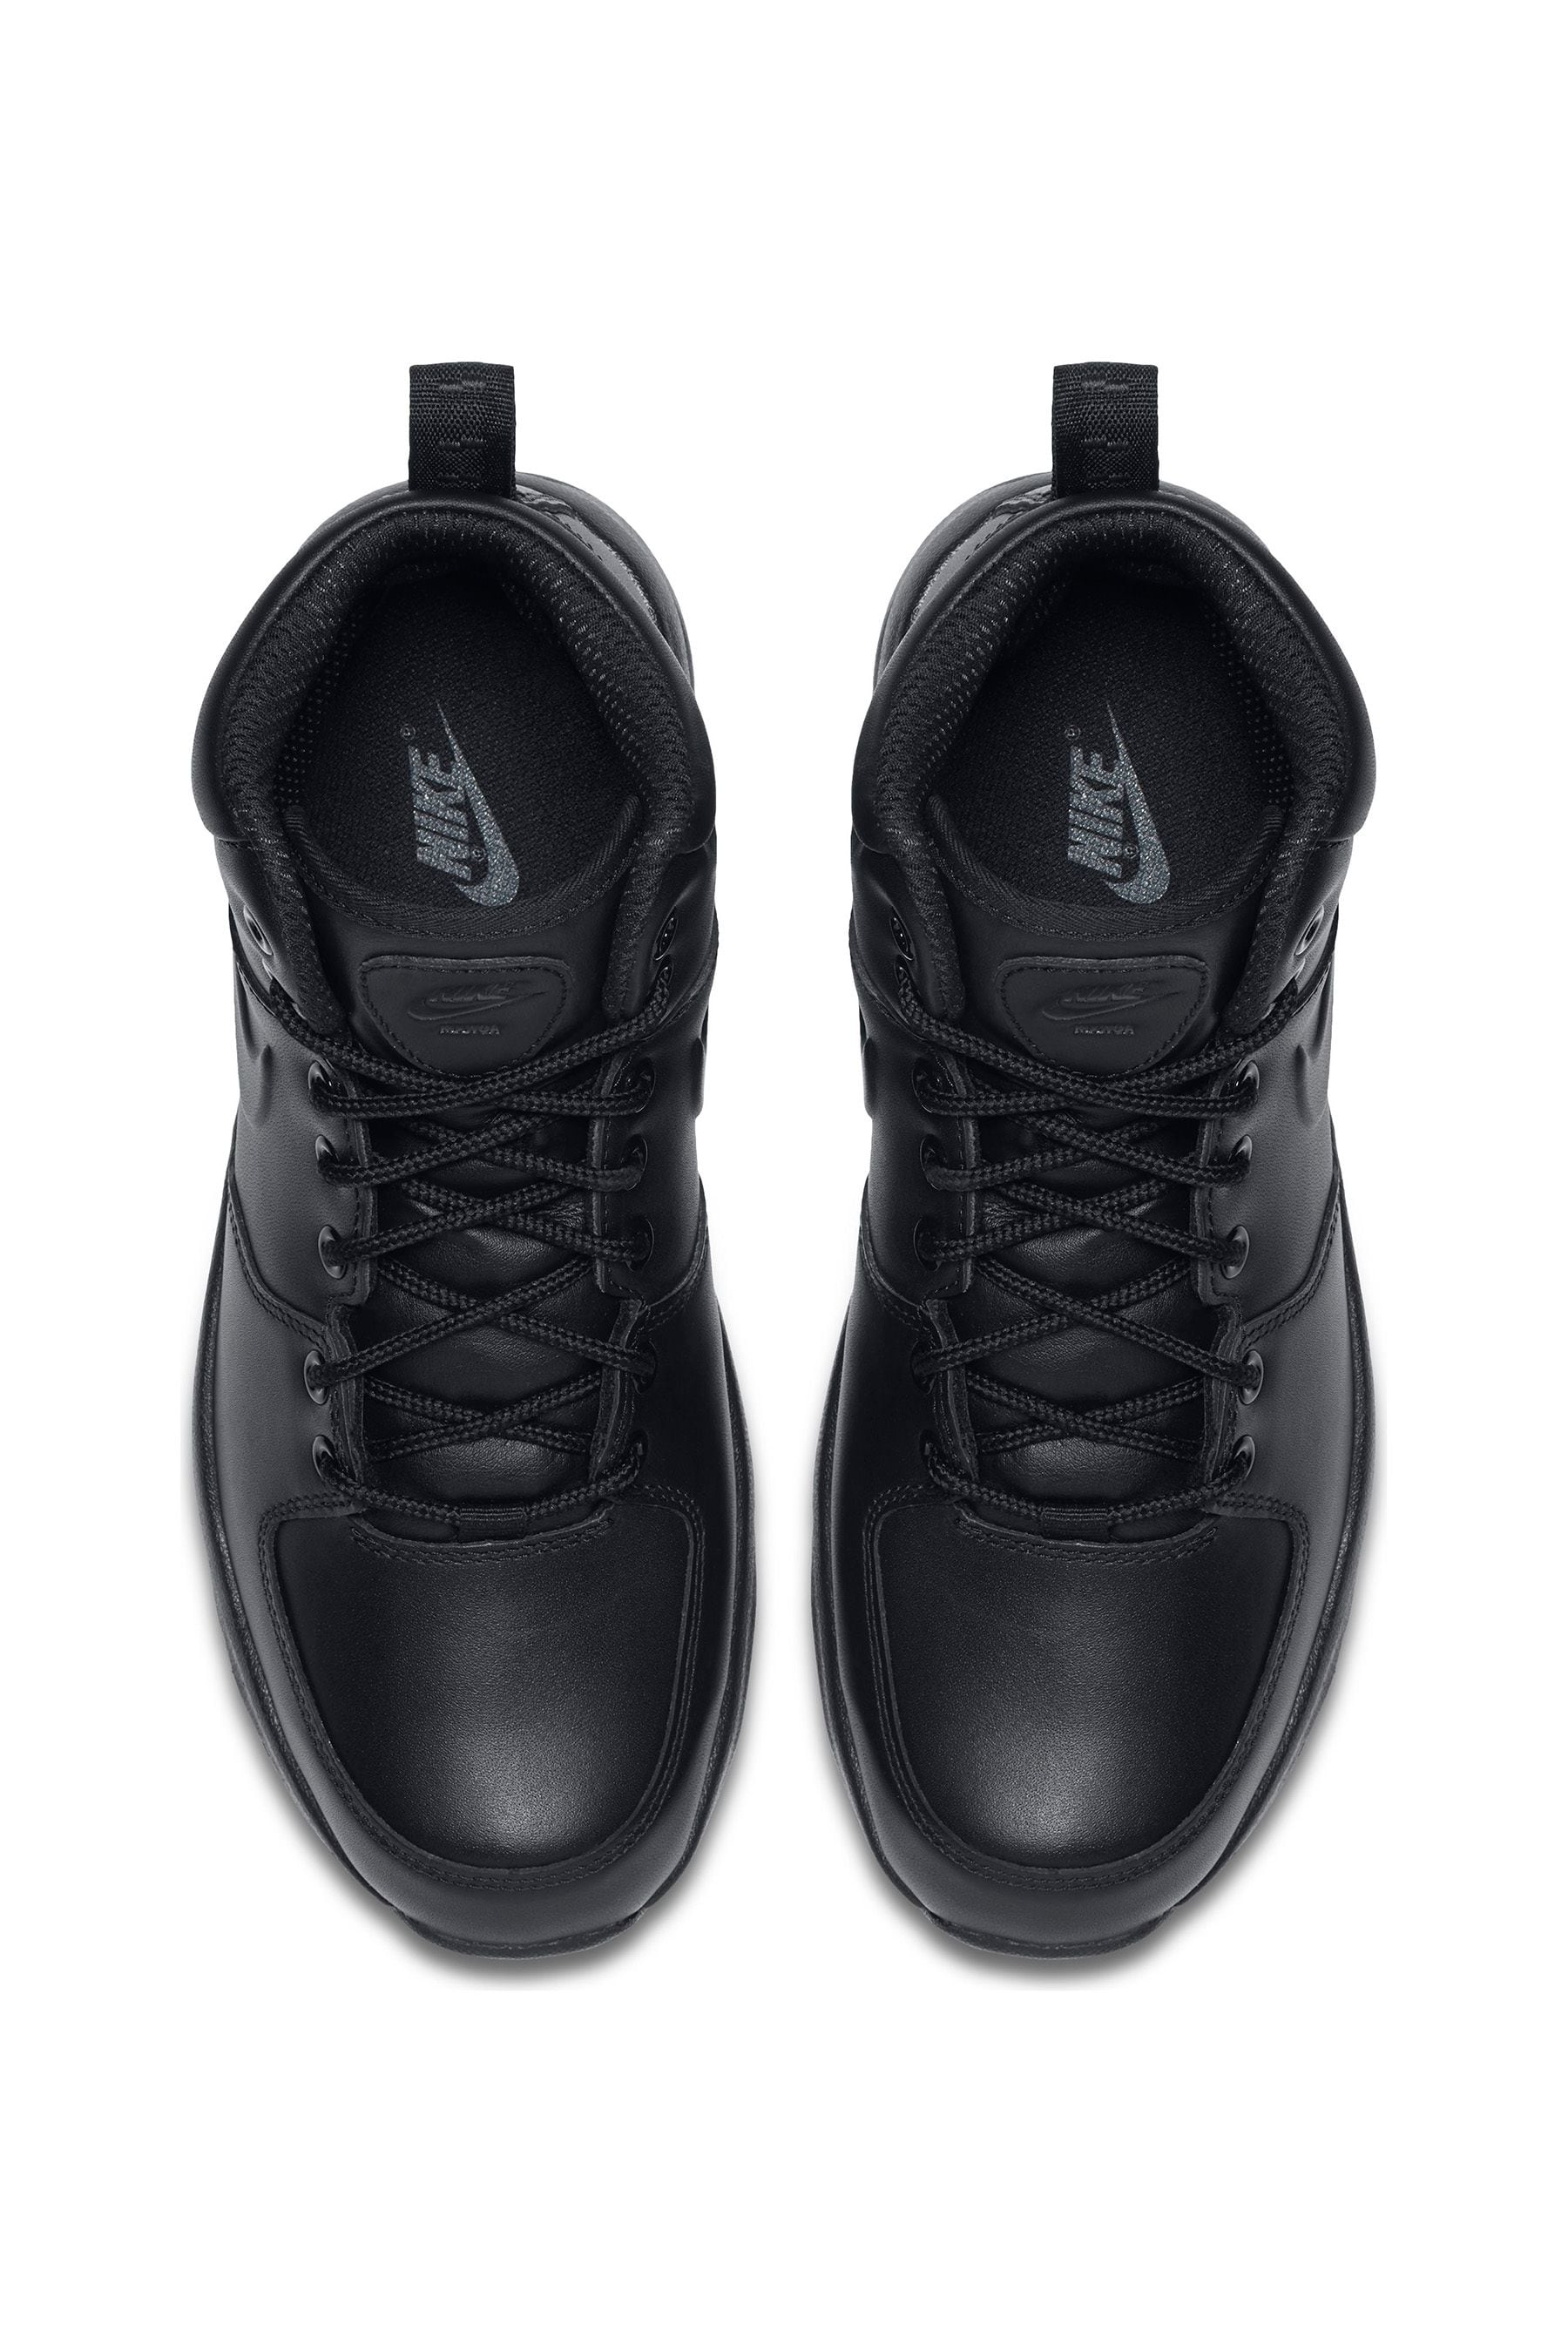 Buy Nike Black Manoa Boots from the Next UK online shop